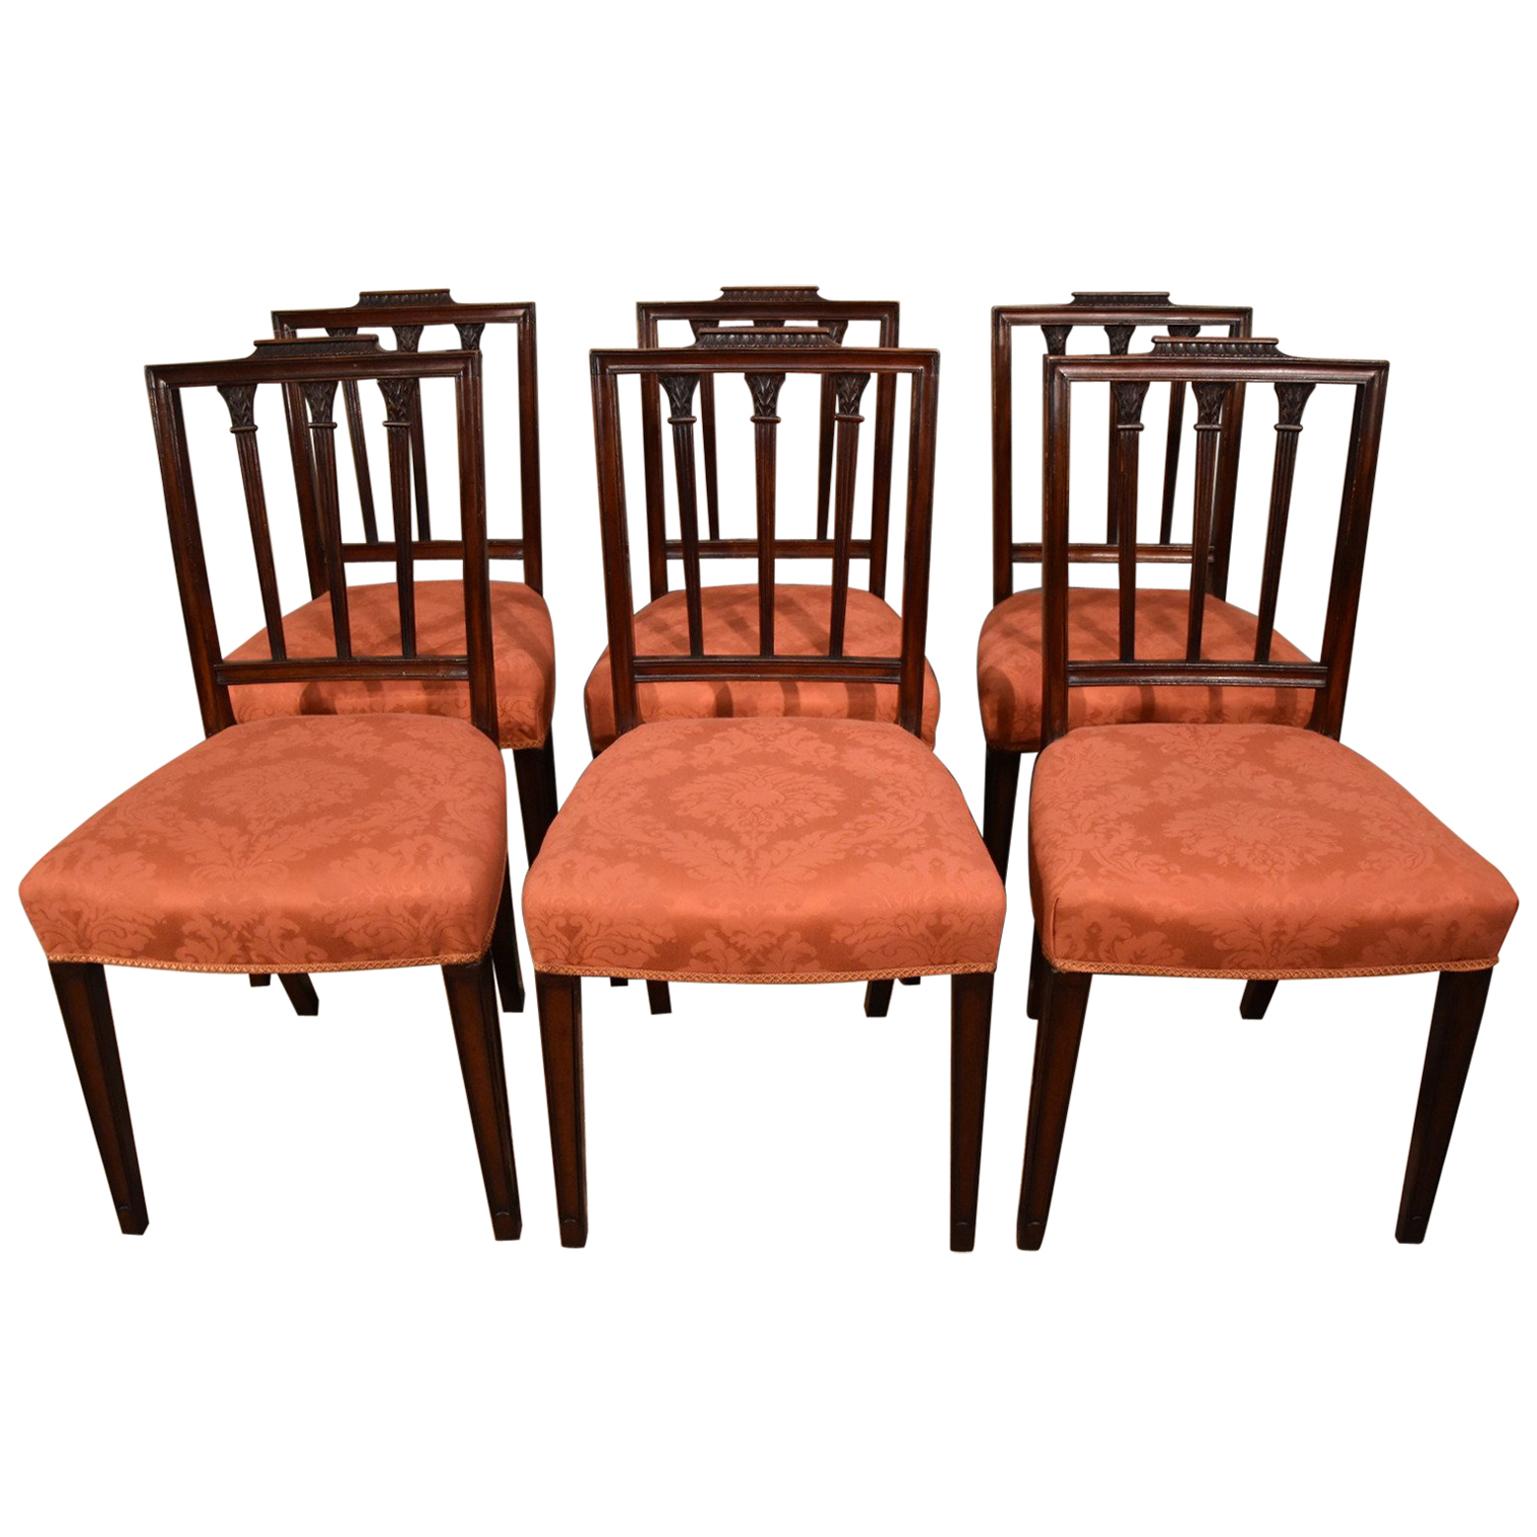 Superb Set of Late 18th Century Mahogany Dining Chairs